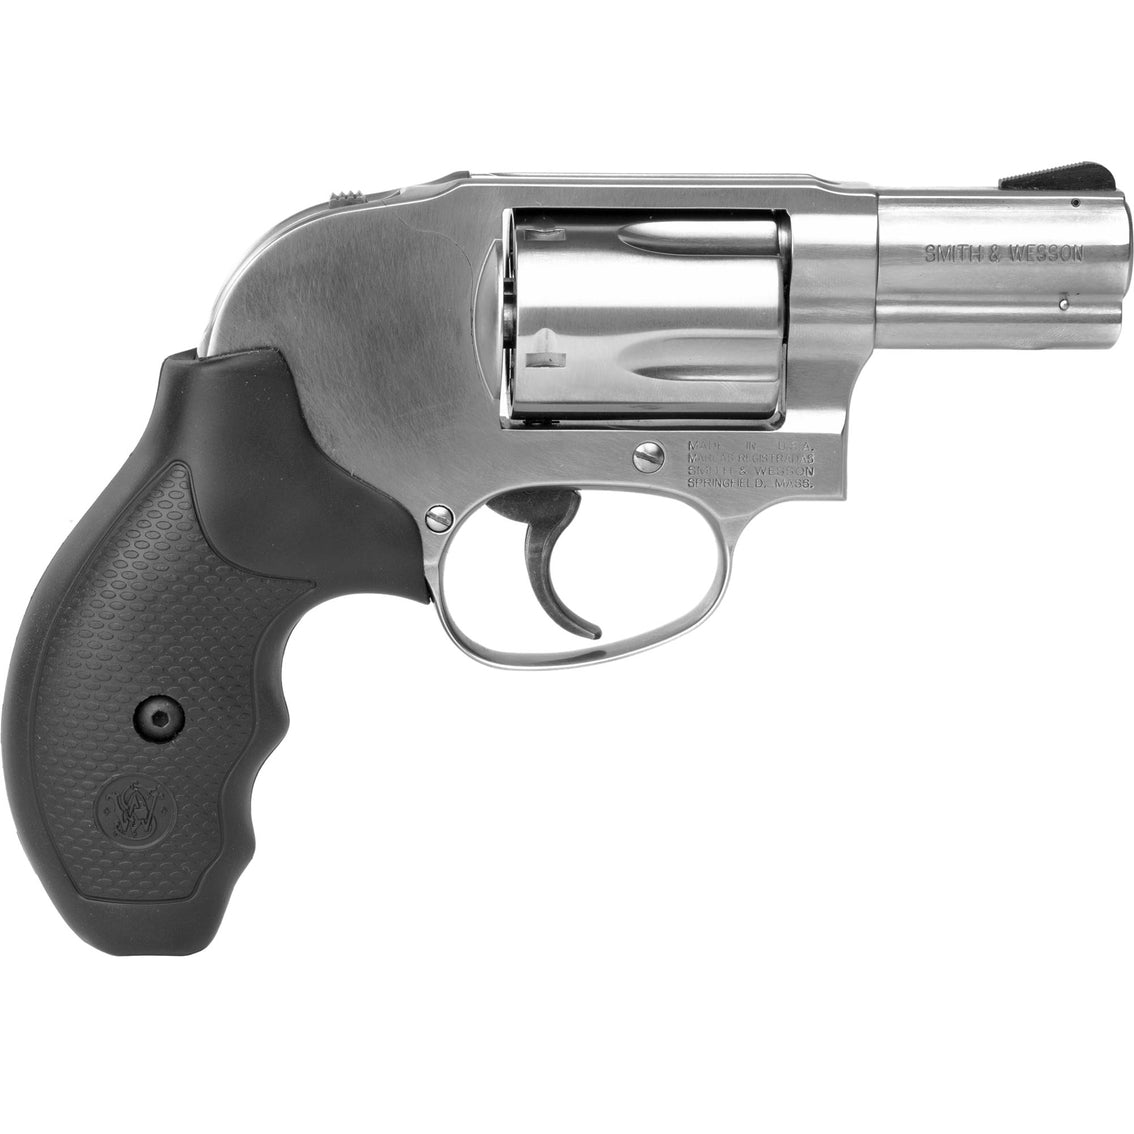 Smith & Wesson Model 649 Review: Pros and cons of the Model 649